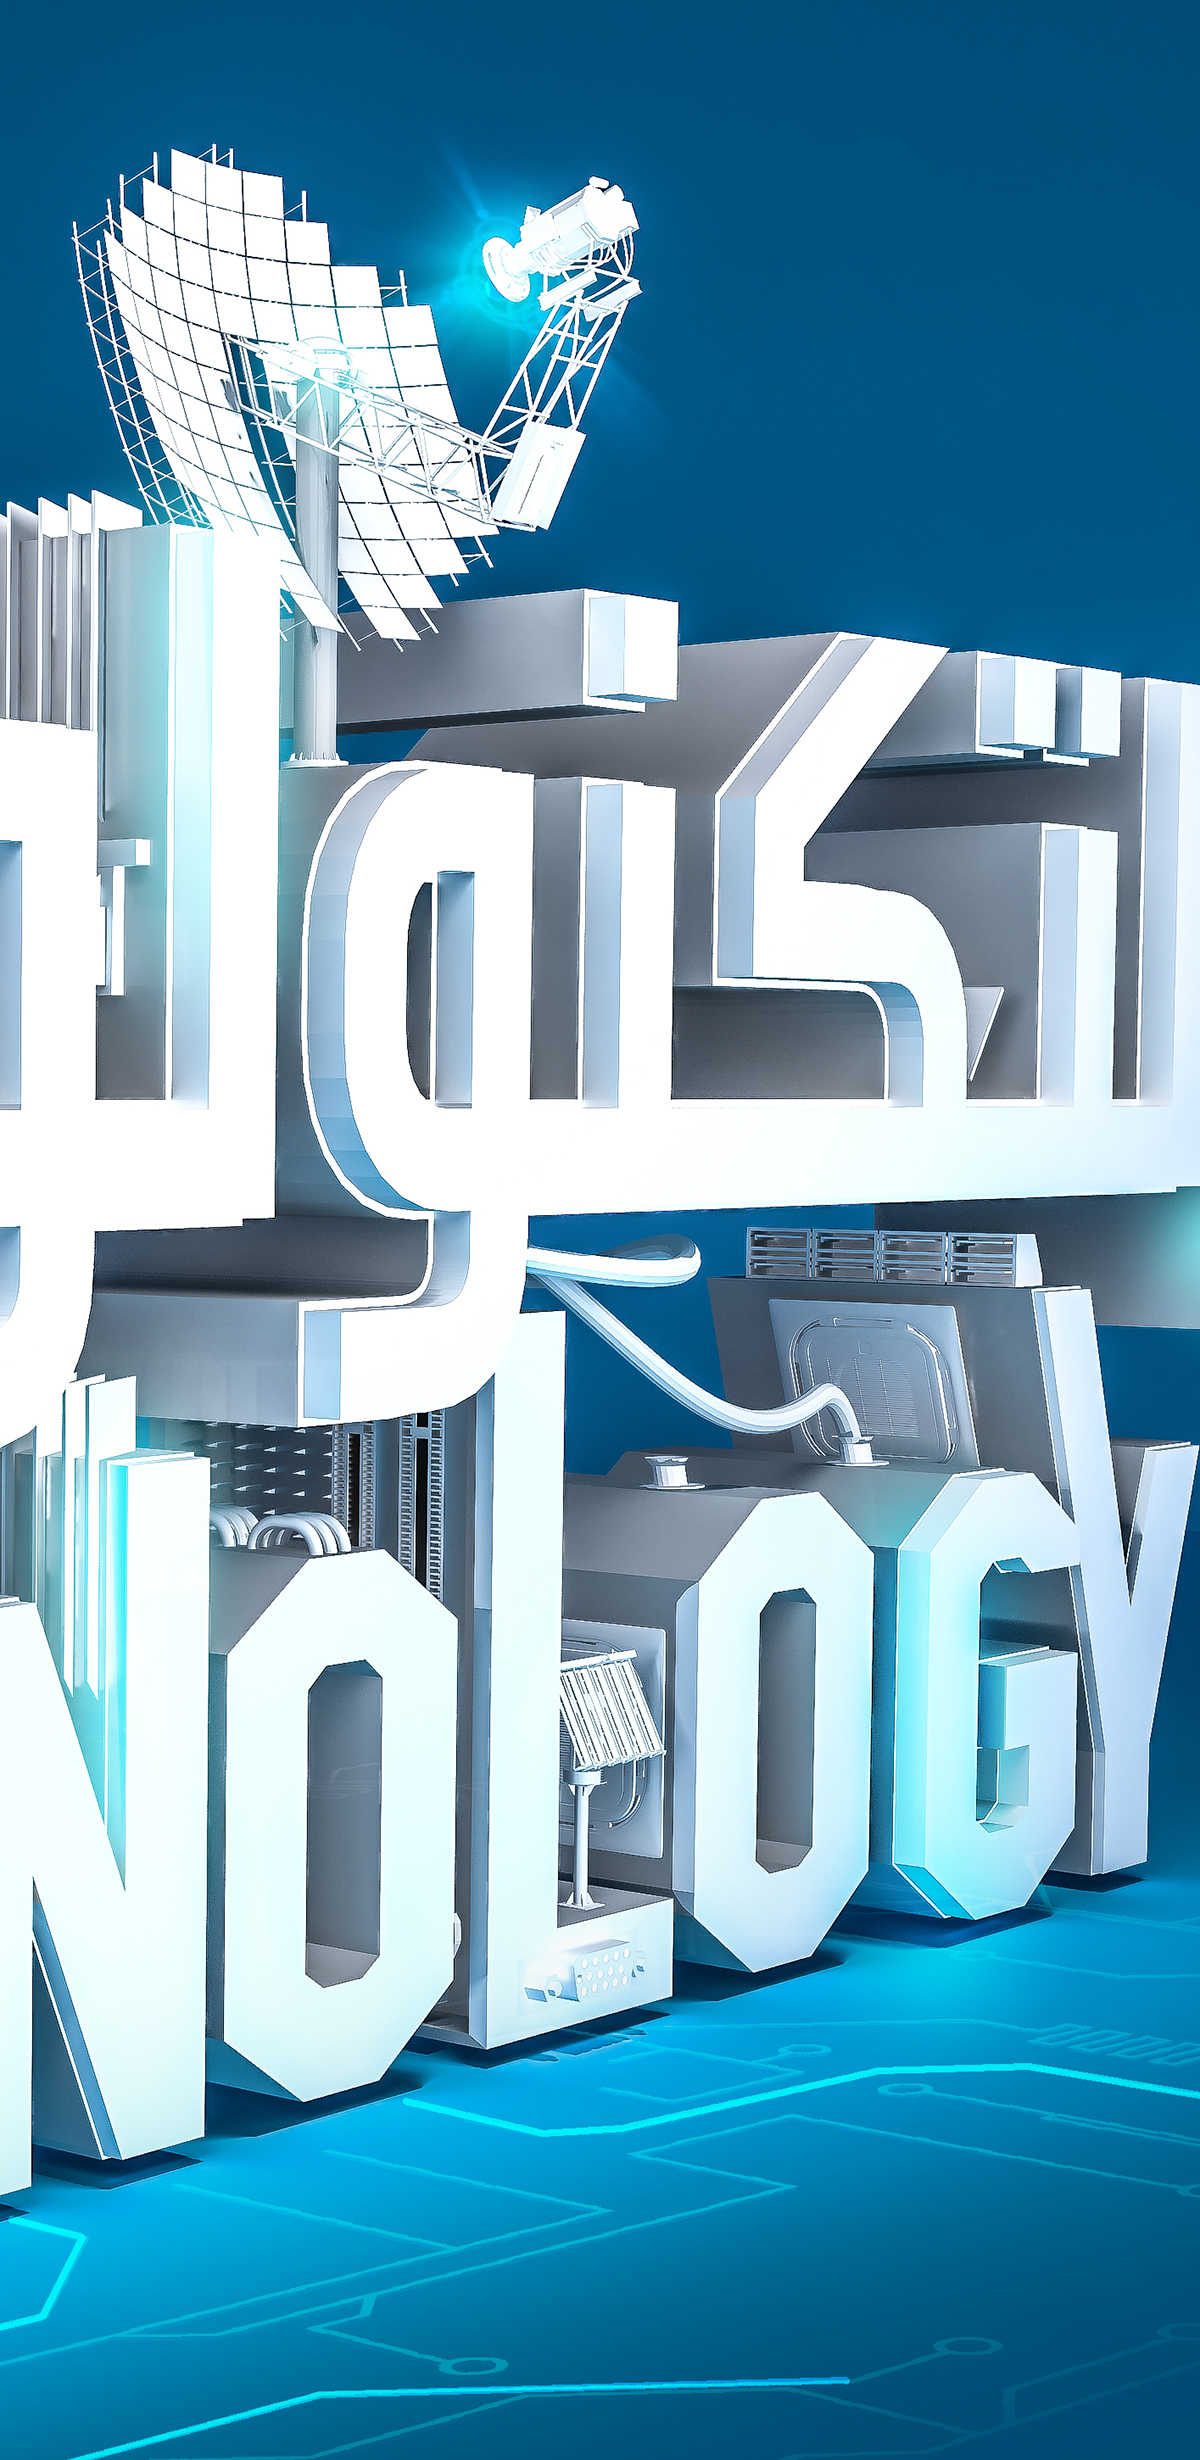 arabic typo gold new style 3D graphic colors blue Technology creative letters designer modling ad arabic design cool